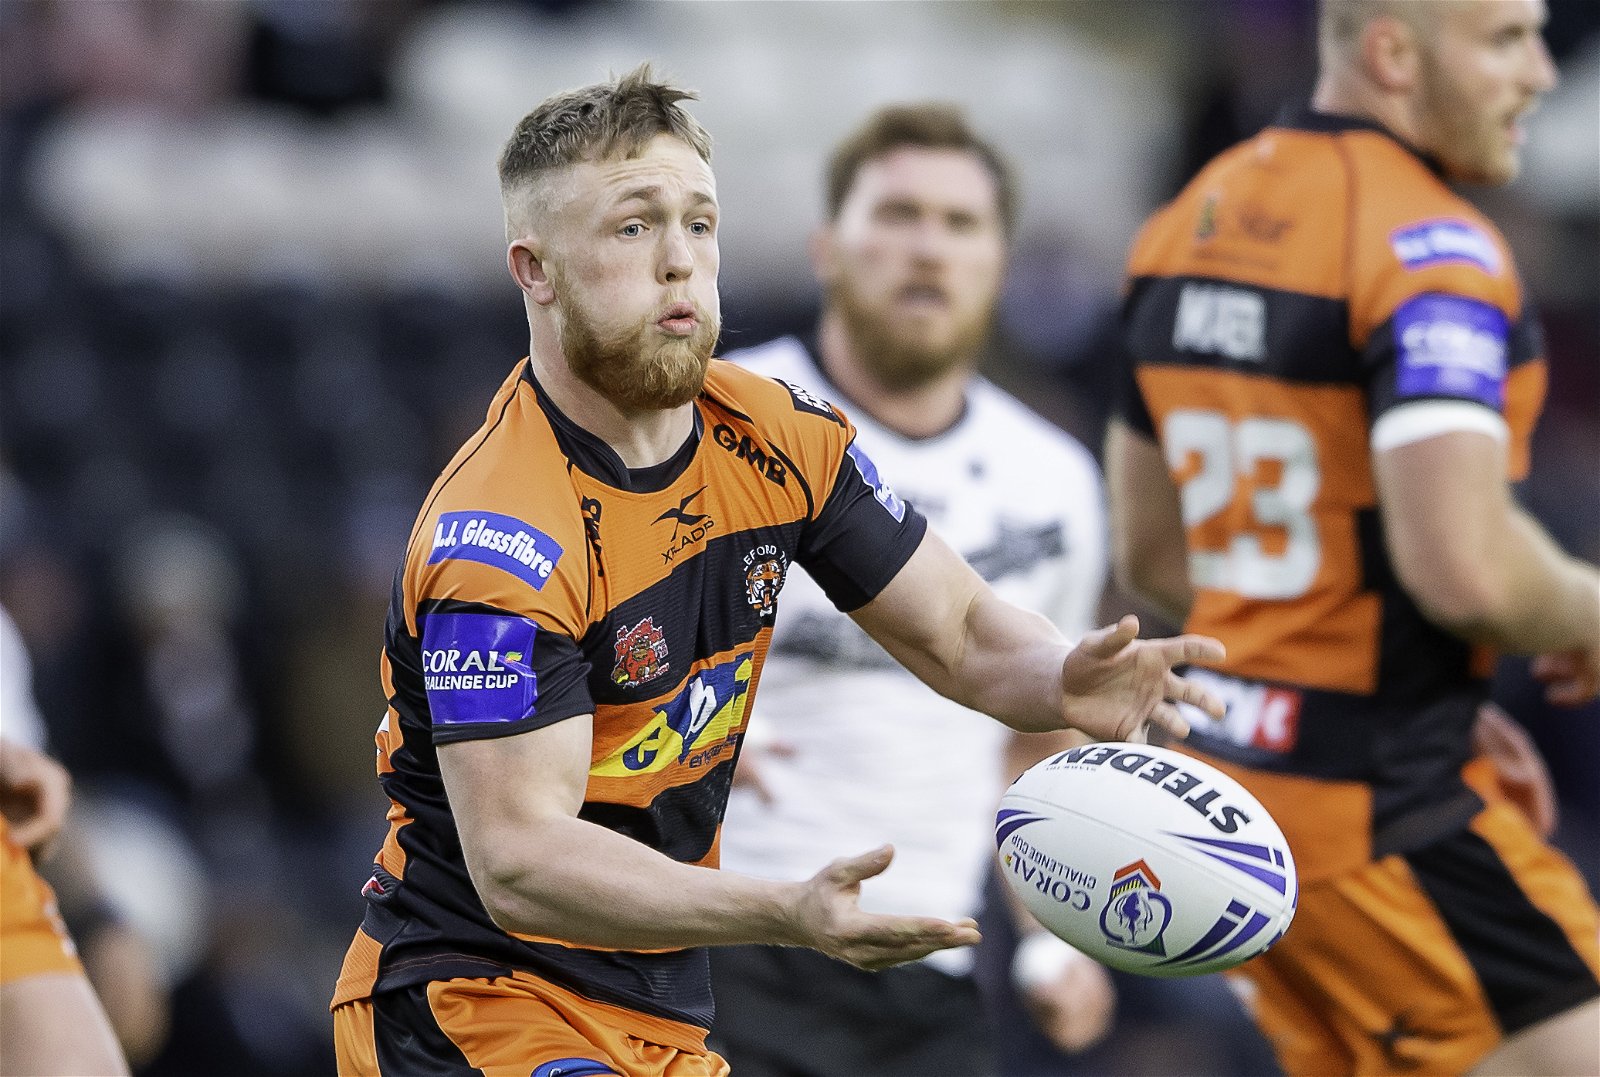 Cory Aston playing for Castleford Tigers in an orange and black horizontal-striped kit.